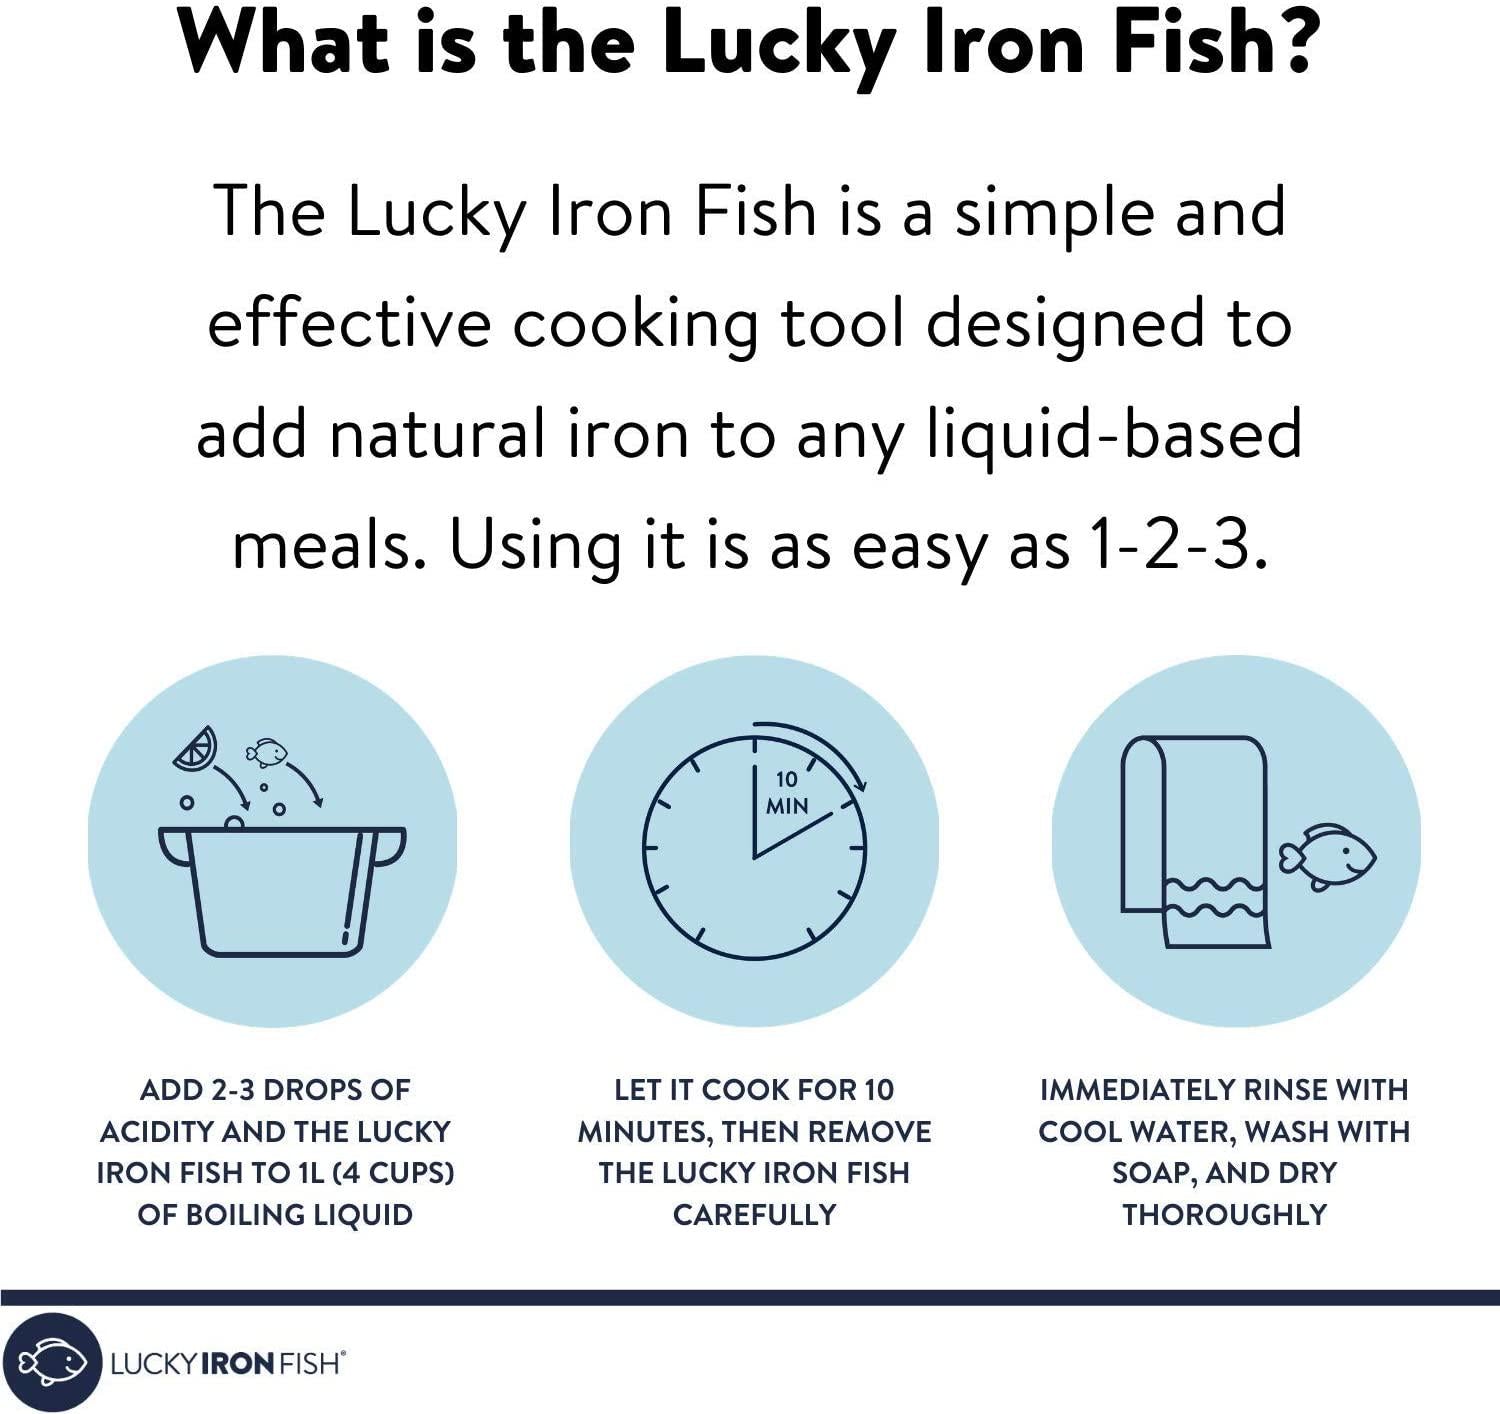 Lucky Iron Fish, Lucky Iron Fish A Natural Source of Iron - The Original Cooking Tool to Add Iron to Liquid-Based Meals, Reduce Iron Deficiency Risks - an Iron Supplement Alternative, Ideal for Menstruators and Vegans